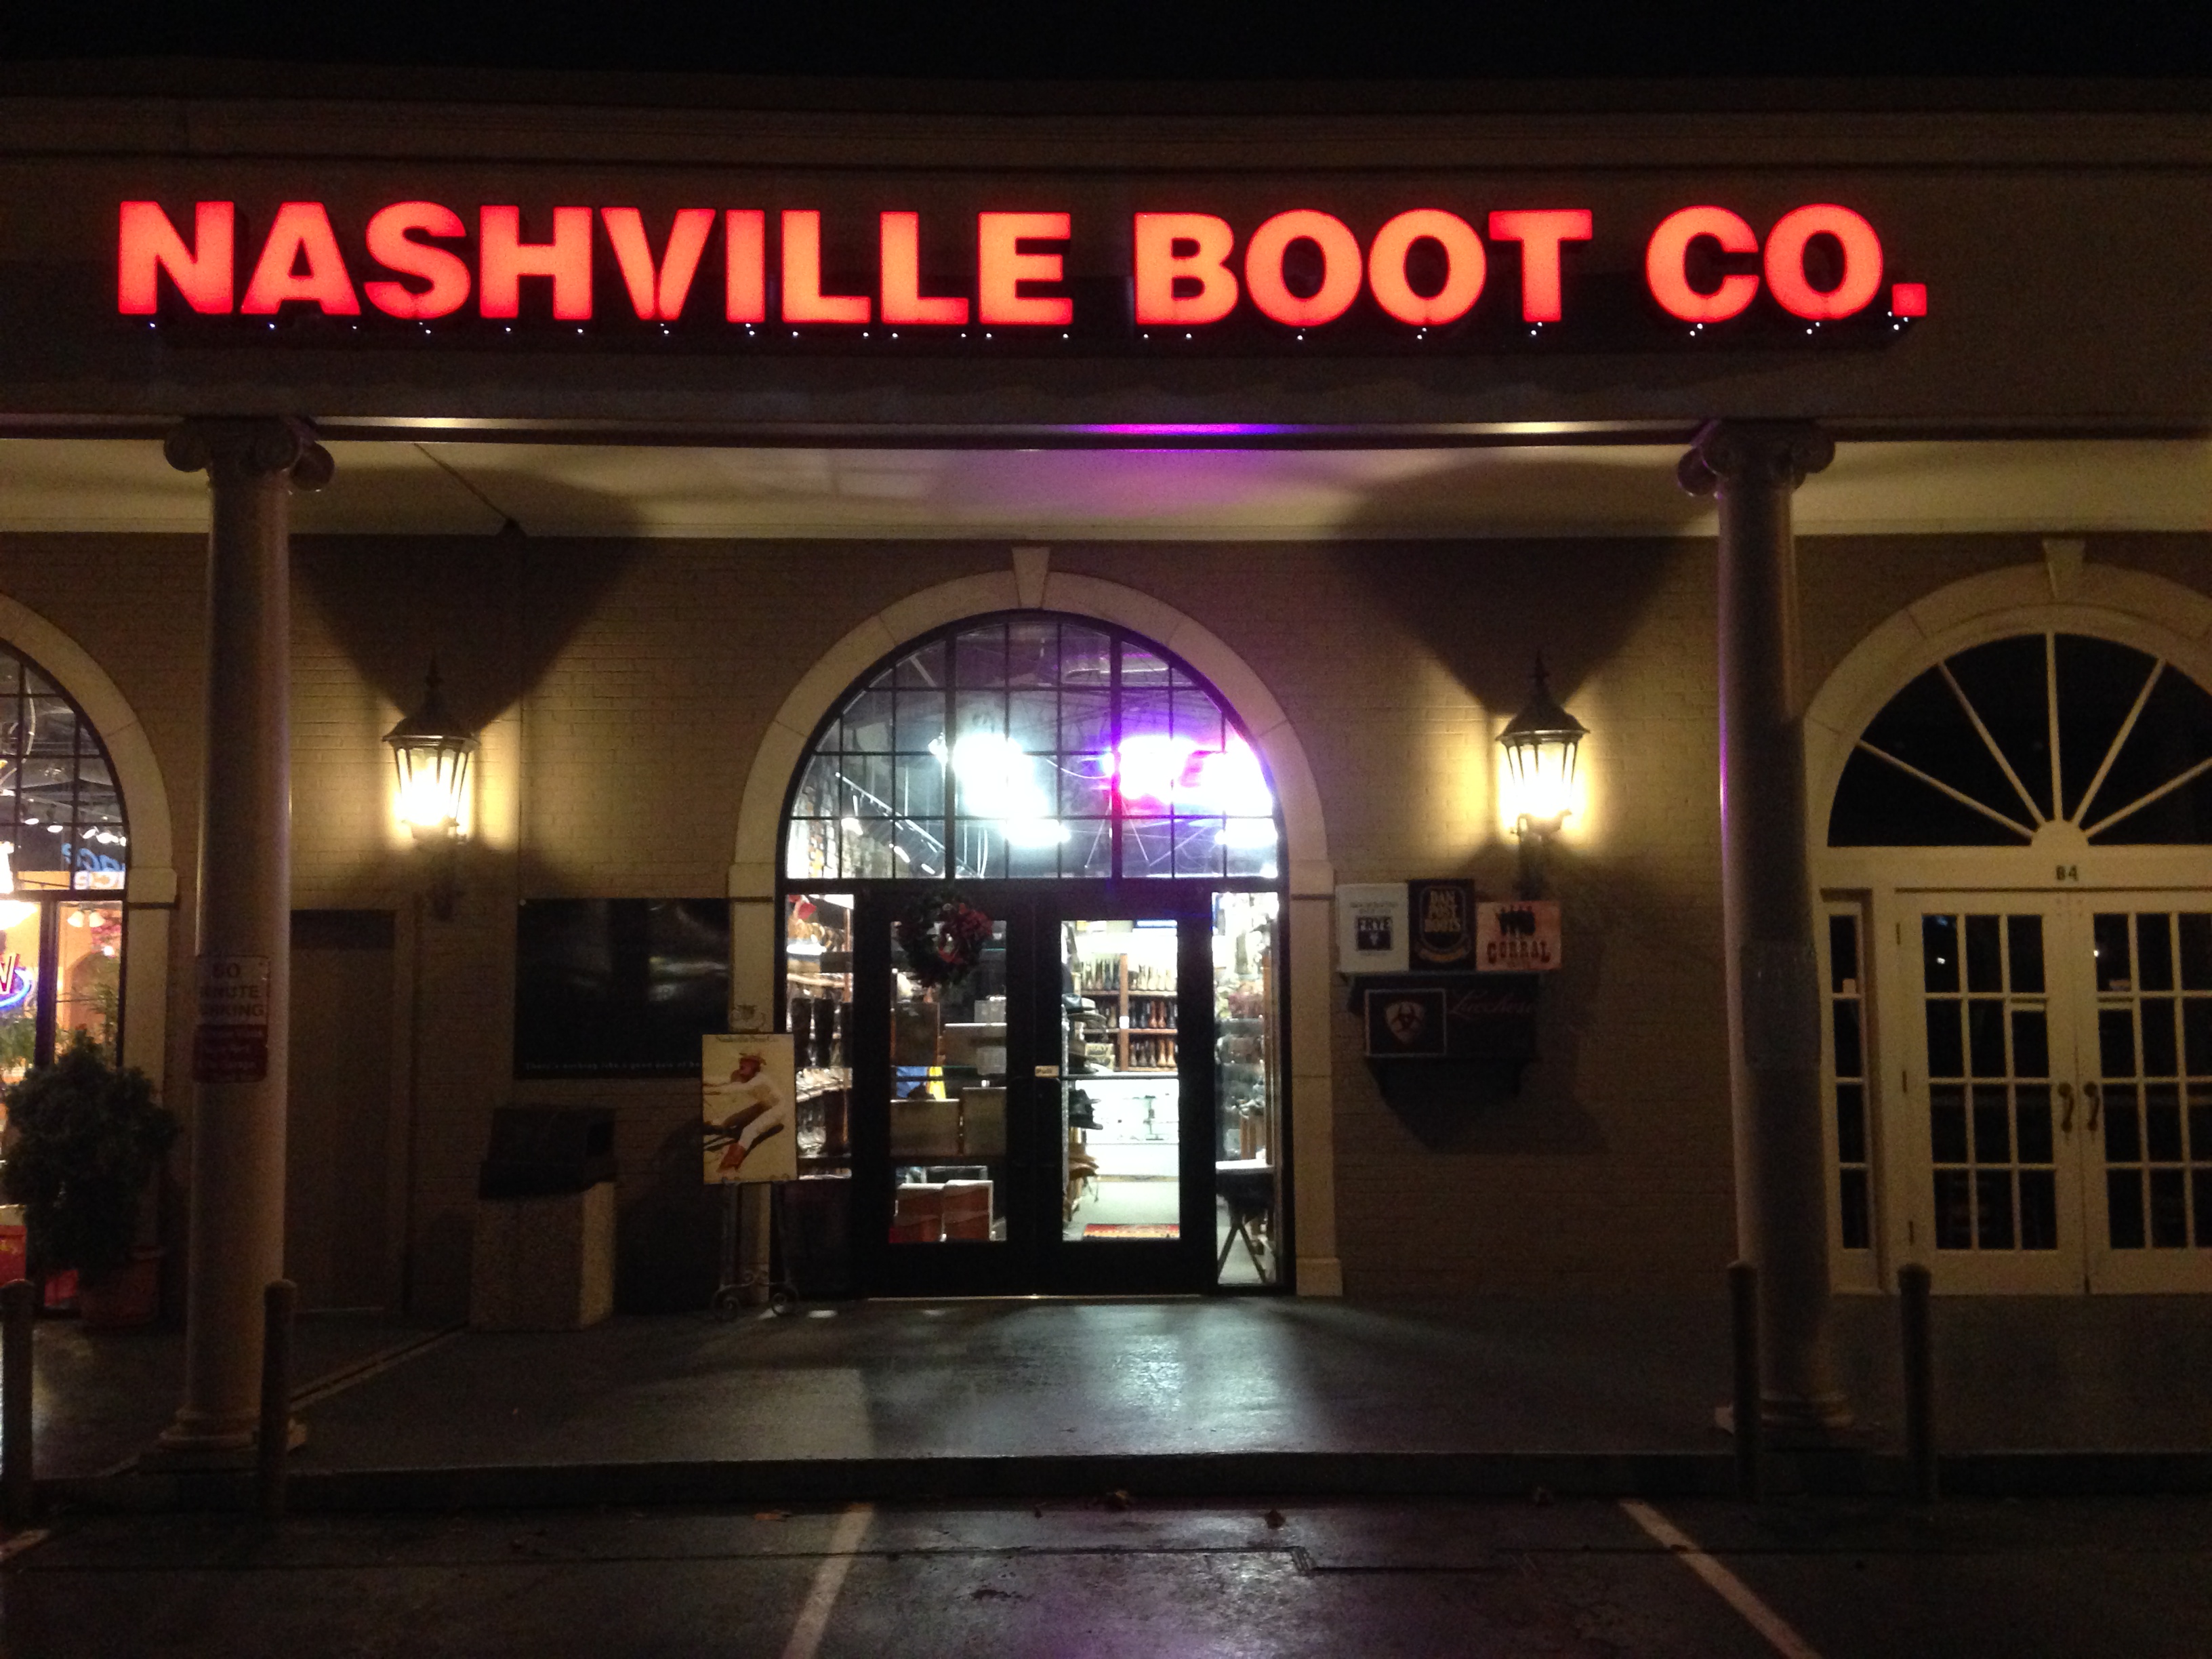 Nashville Boot Co. Store - Ariat boots, Dan Post boots, Lucchese